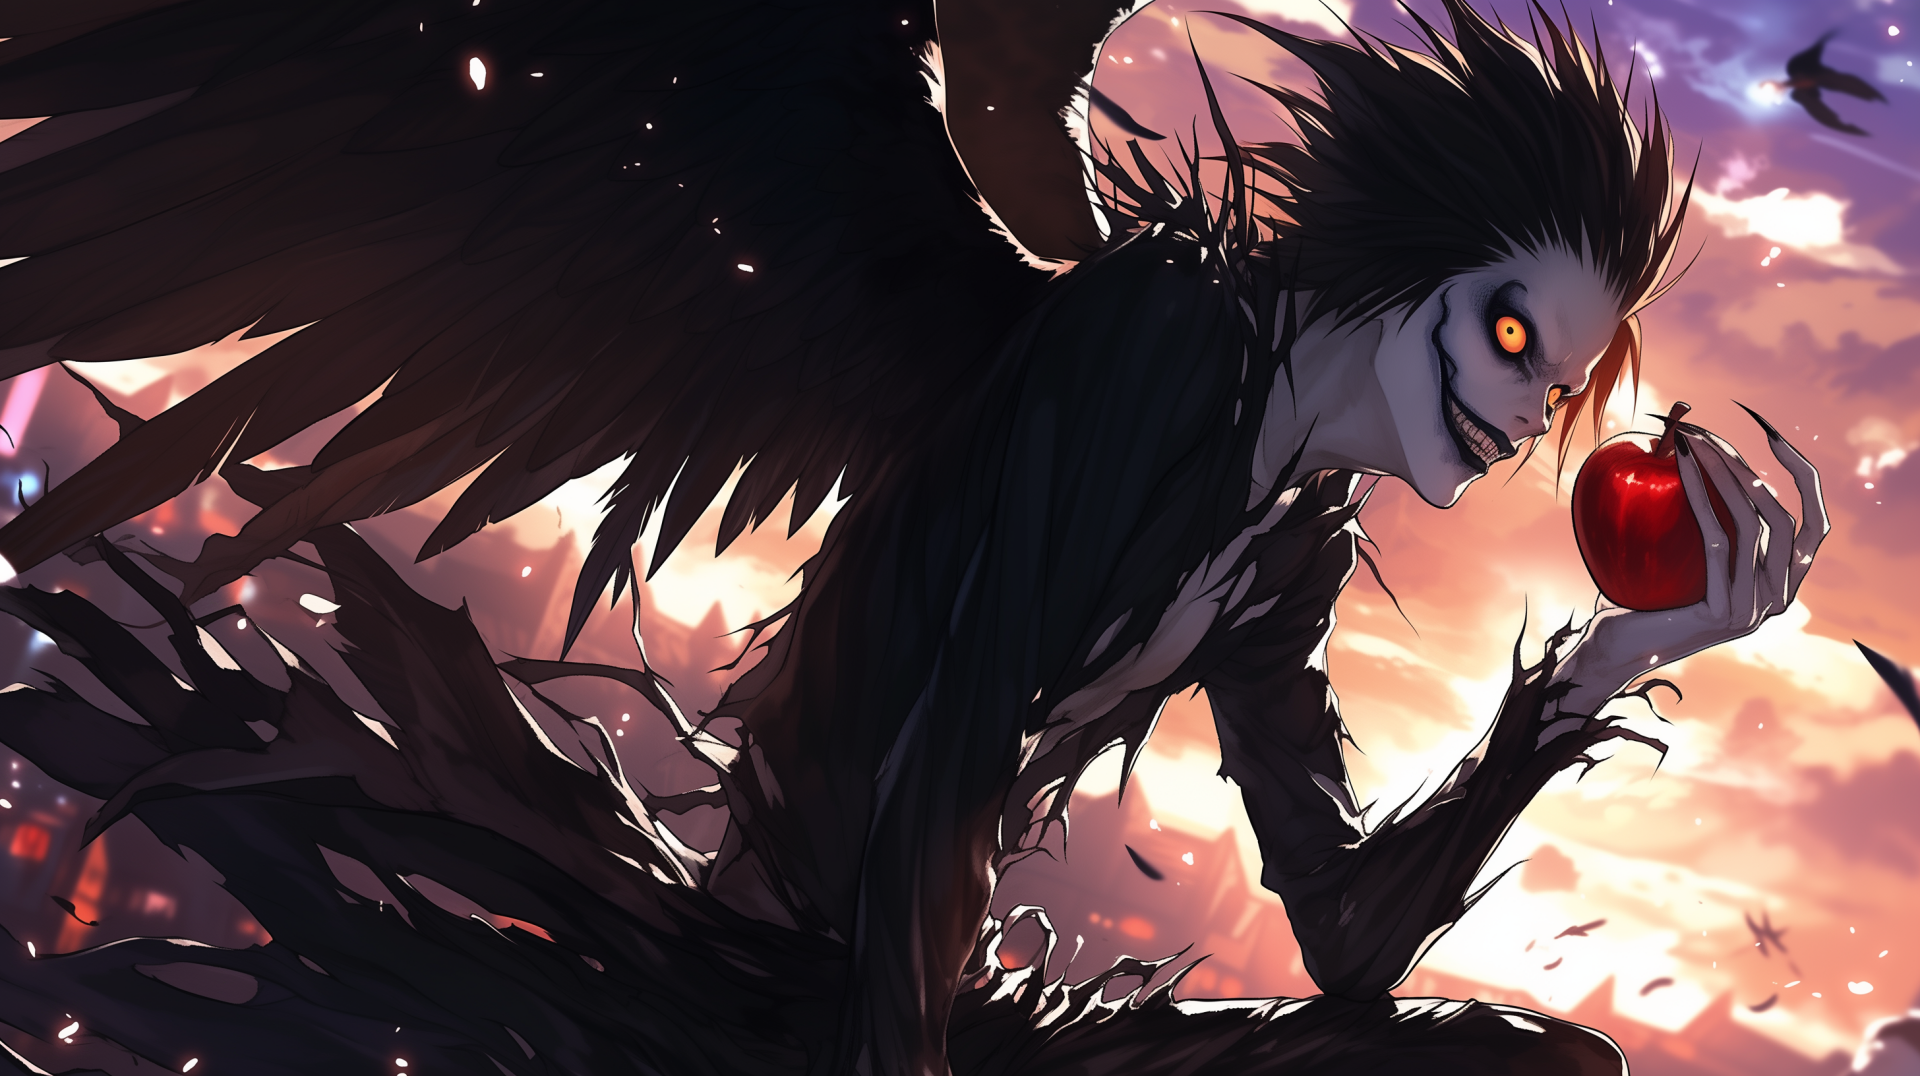 HD desktop wallpaper featuring Ryuk from Death Note, set against a dynamic sunset background, with Ryuk holding a red apple. Anime-inspired artwork.